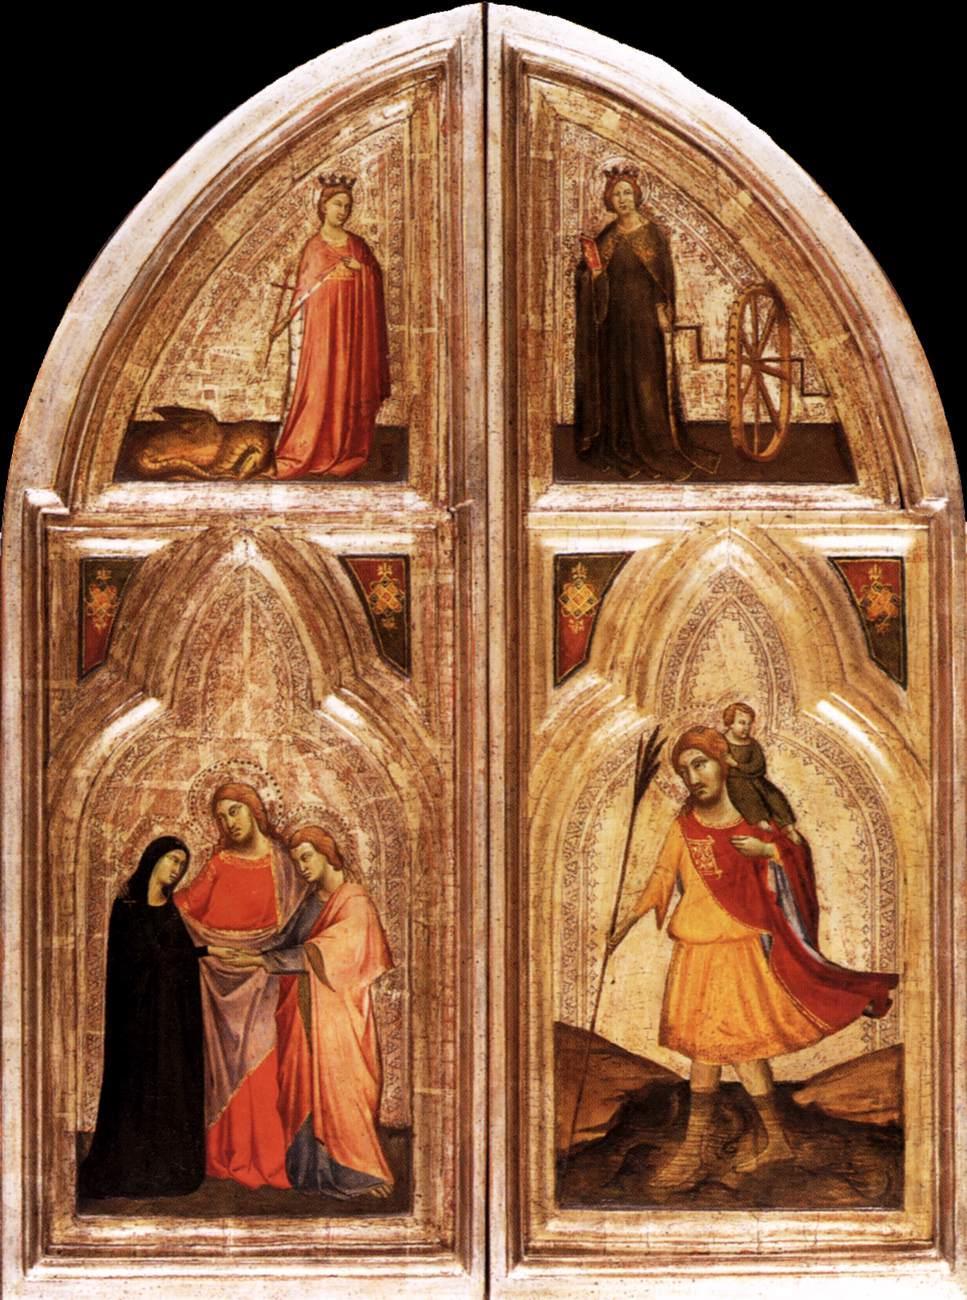 CHAPTER 1 1.2. Taddeo Gaddi, Triptych (exterior wing), 1333.